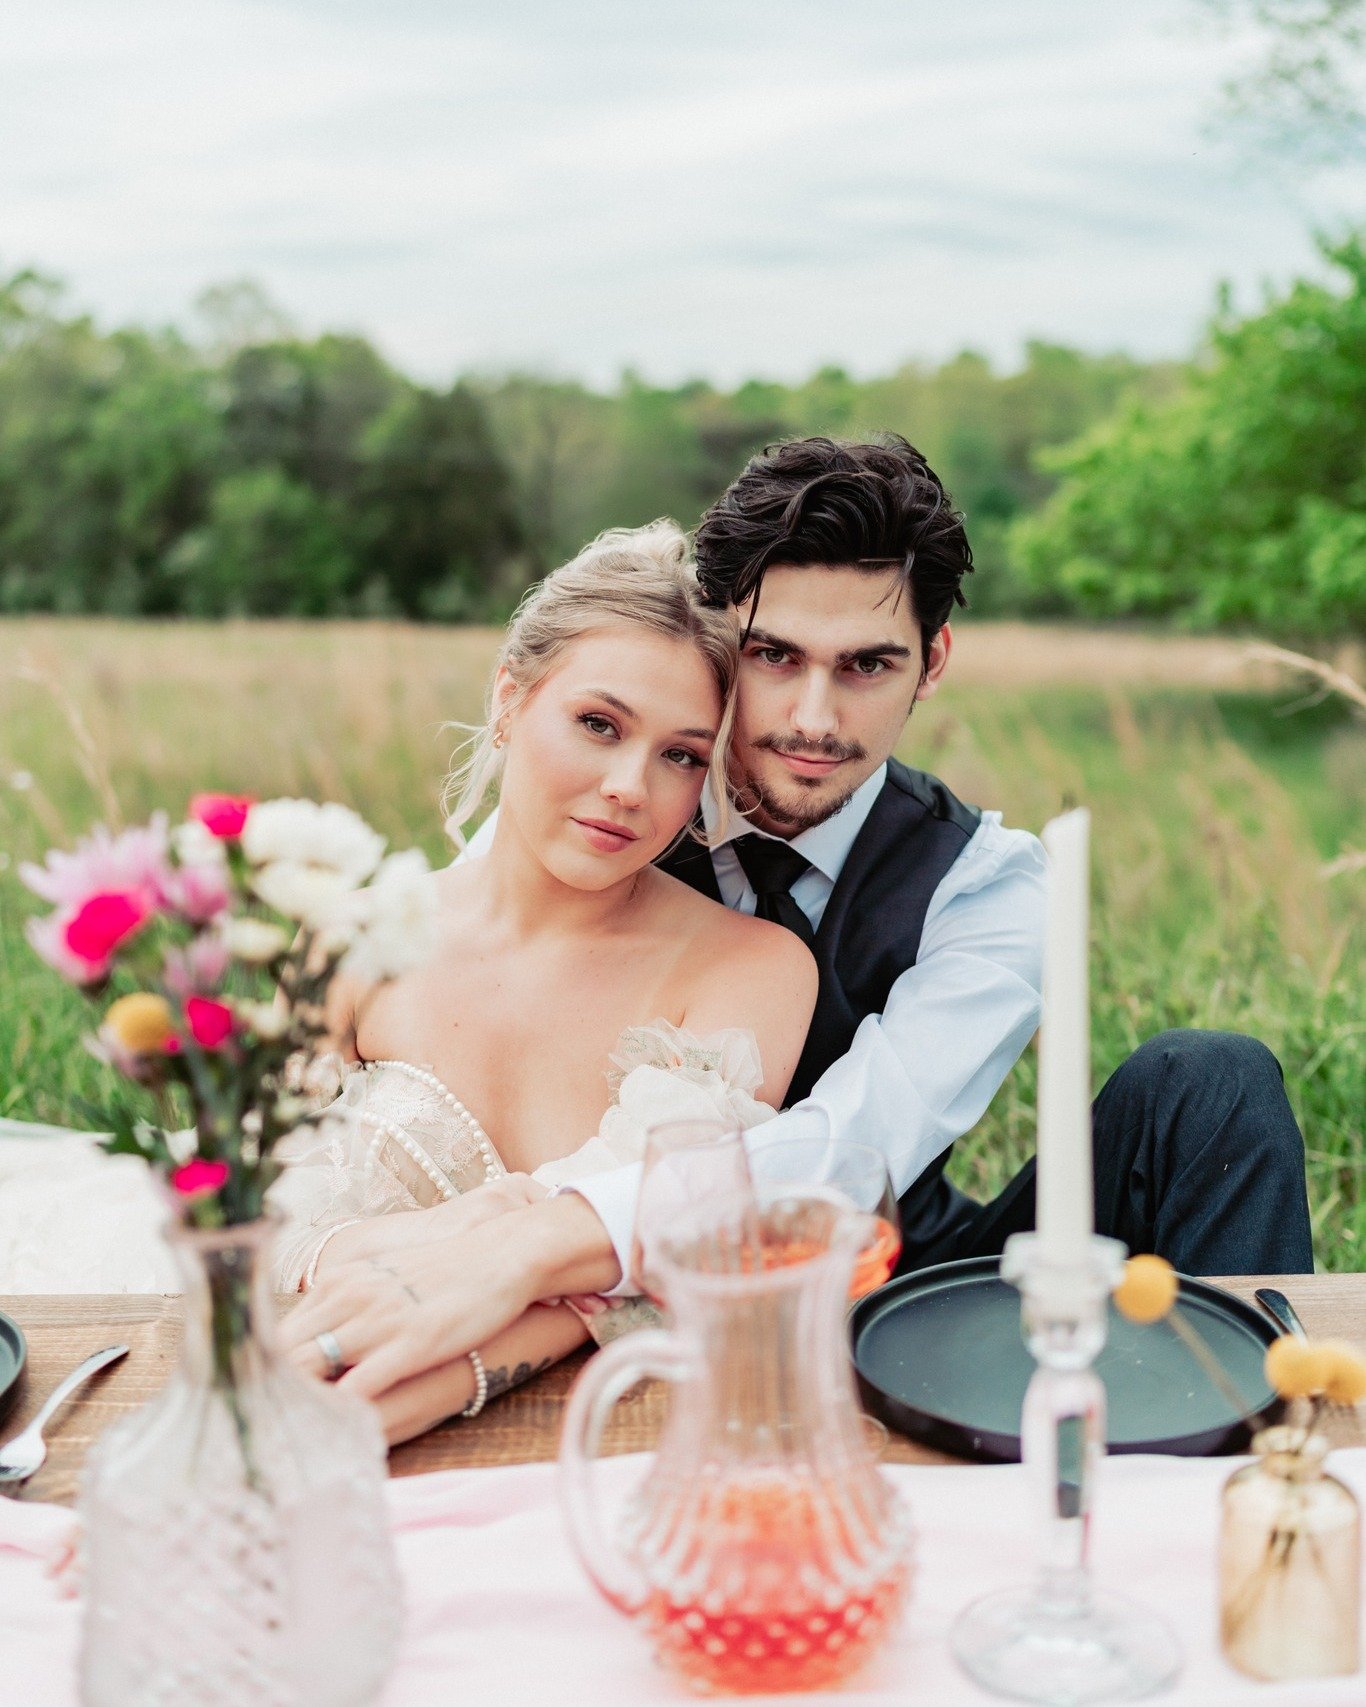 Sneak Peeks of our styled elopement shoot! I had a blast working with some amazing friends on this project + a big special thanks to @creations.by.juanitamarie for all of her creative assistance! If anyone needs a luxury picnic setup, she's your girl